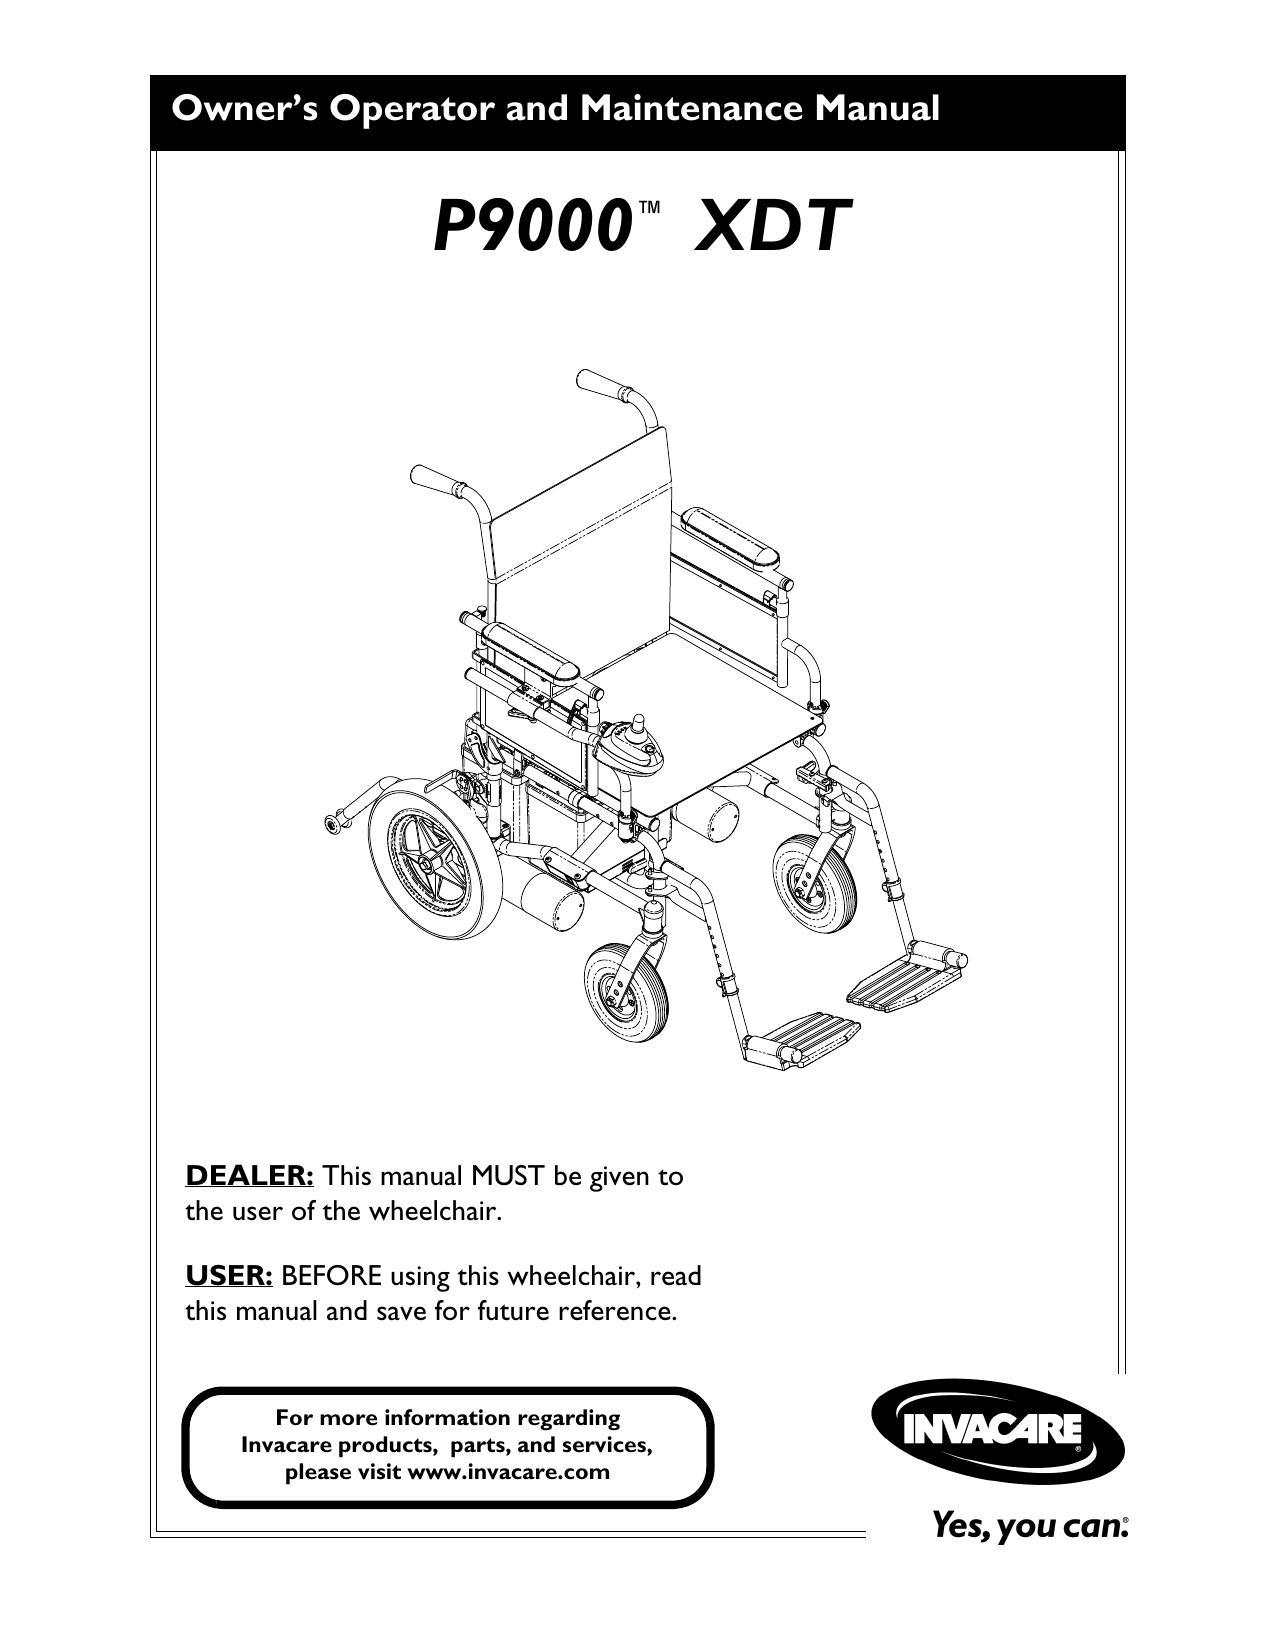 owners-operator-and-maintenance-manual-for-p9ooo-xdt.pdf